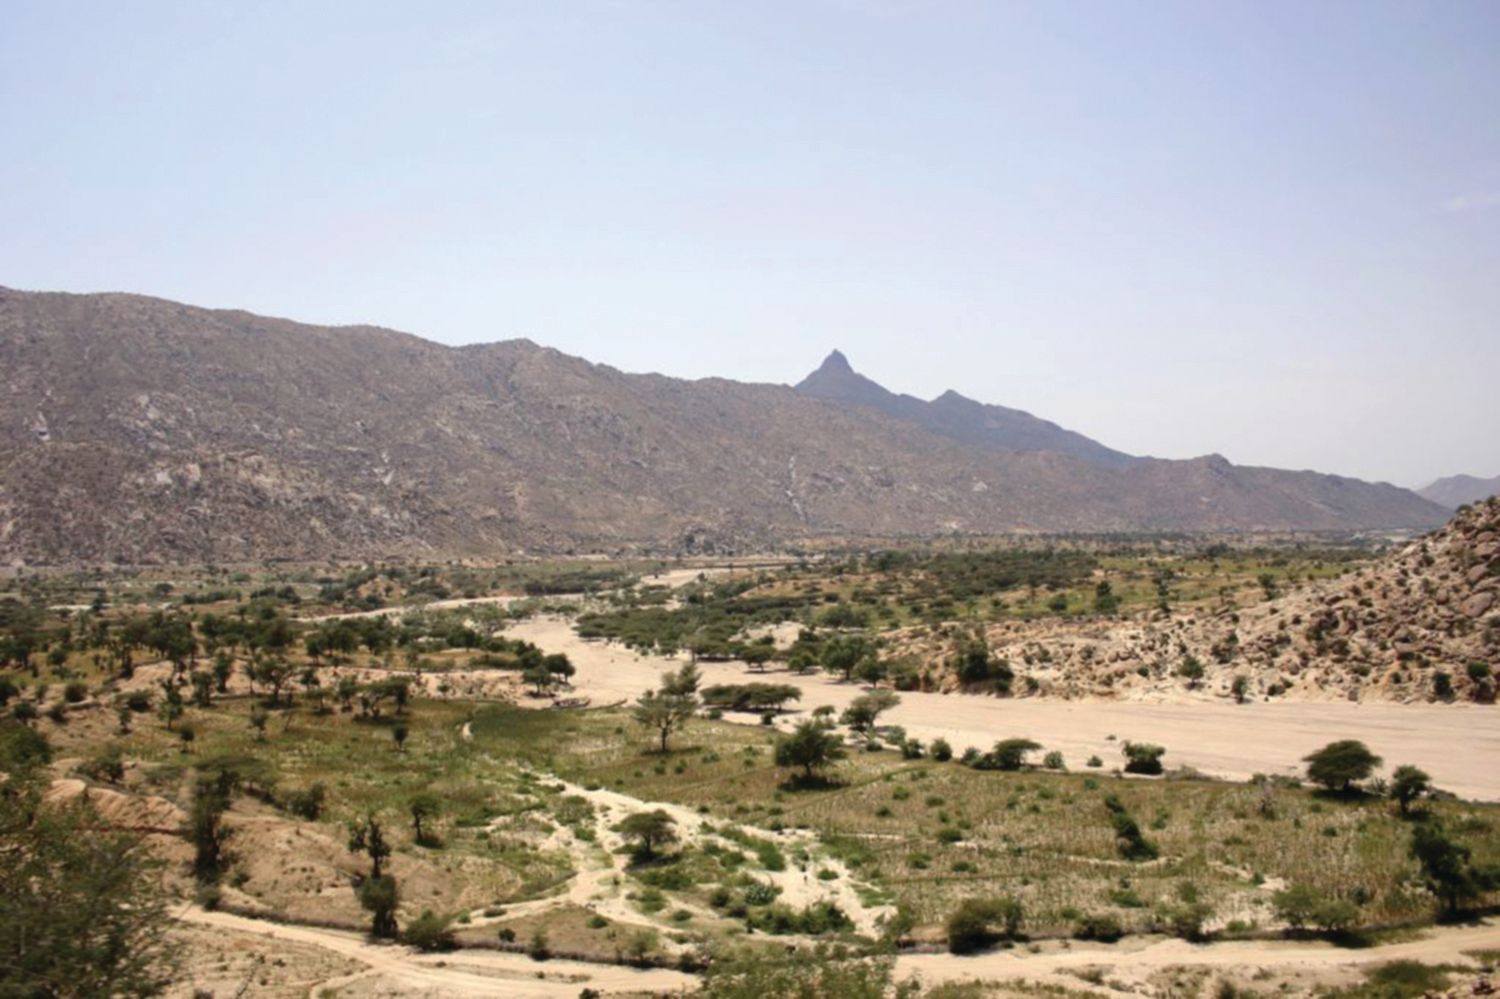 This modern photo of the battleground at Keren displays the harsh climate and difficult terrain that both sides encountered during the prolonged and decisive engagement there in 1940.